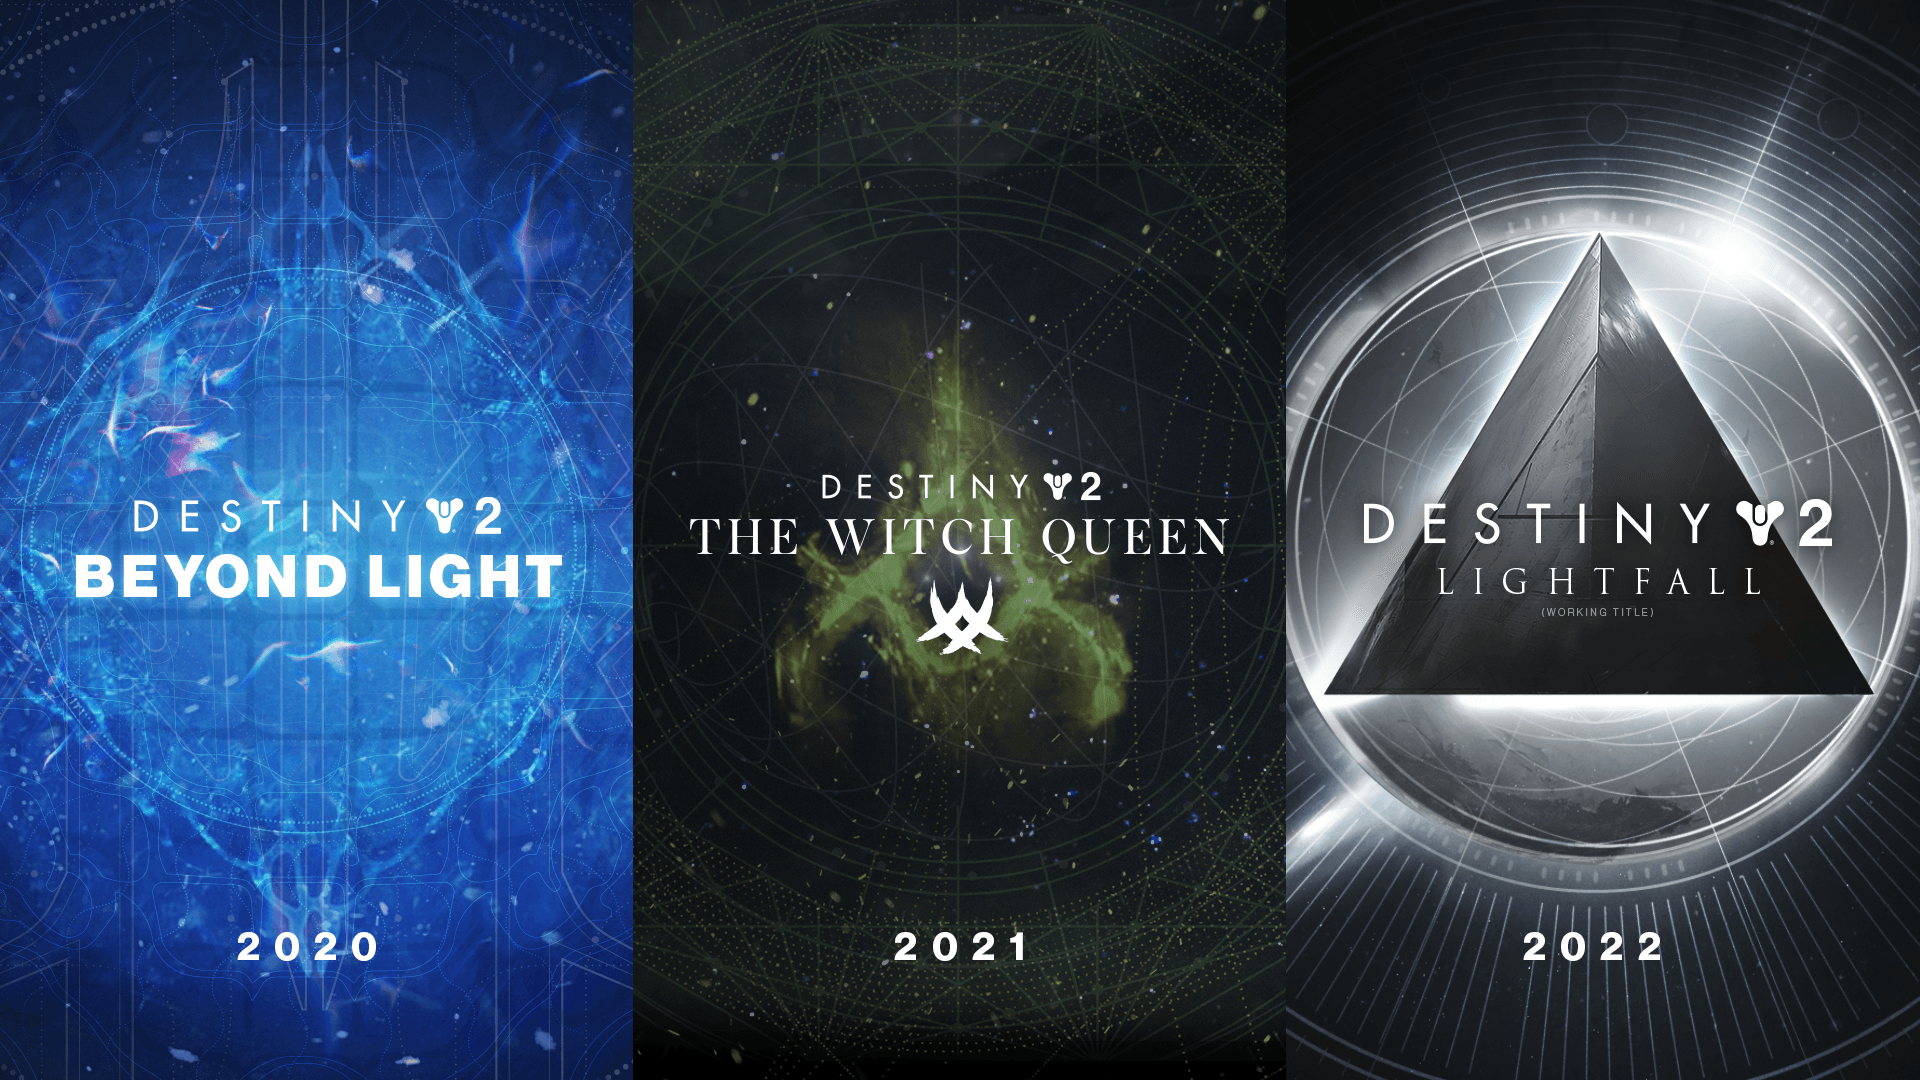 Destiny 2: The Witch Queen and Lightfall Expansions and Future of the